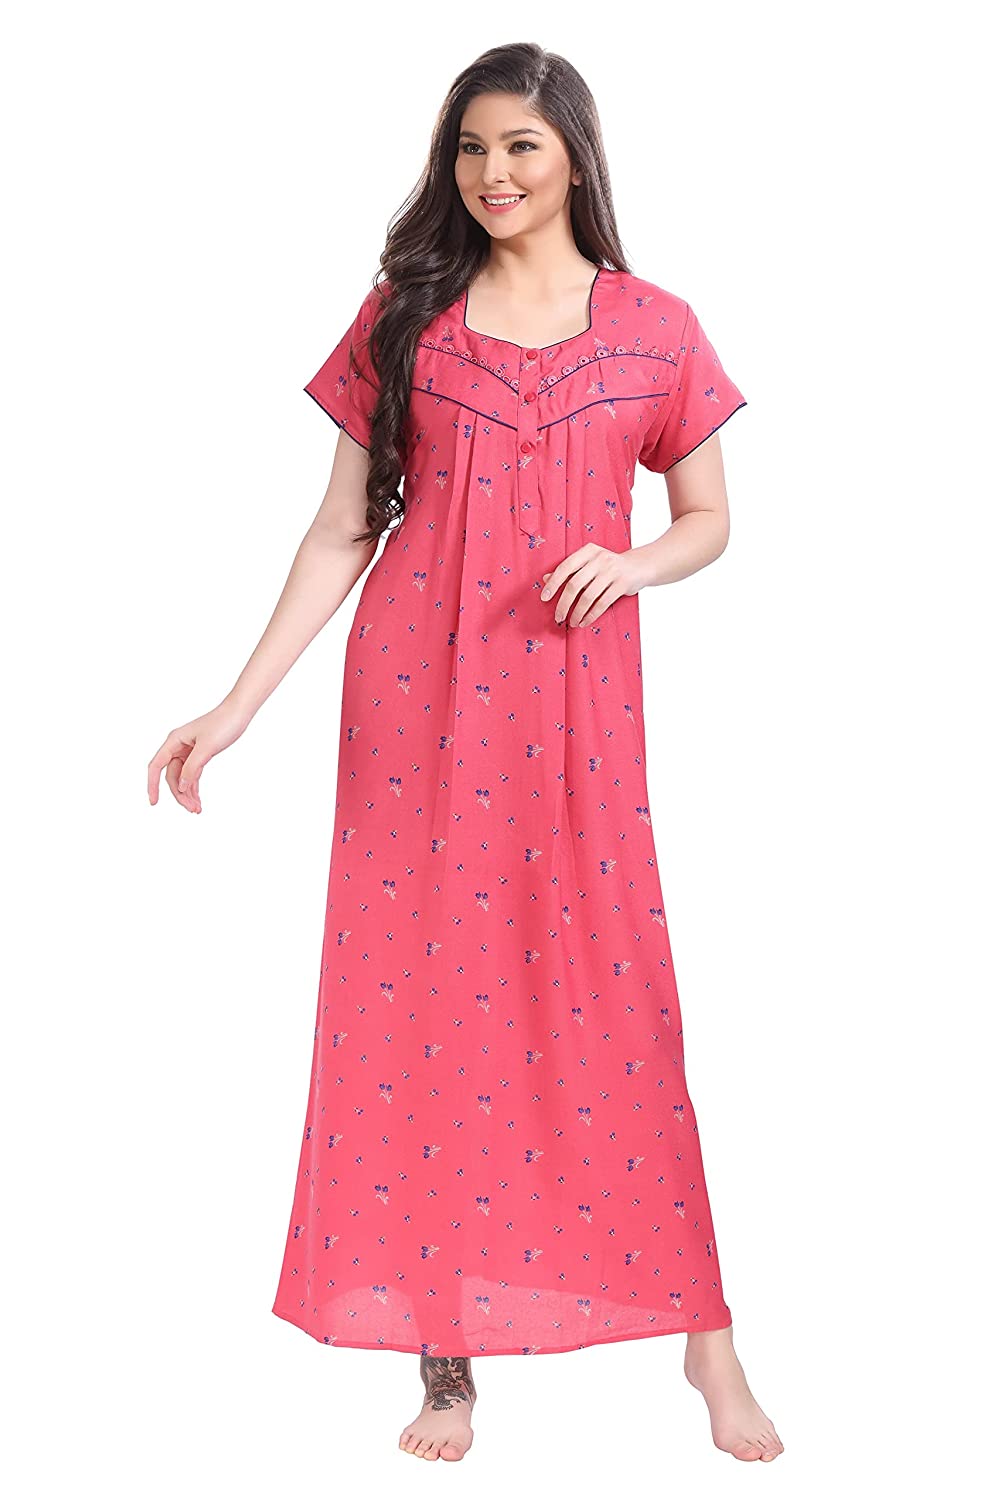 Sexy Night Dress For Women Manufacturers India | Cnb Exports